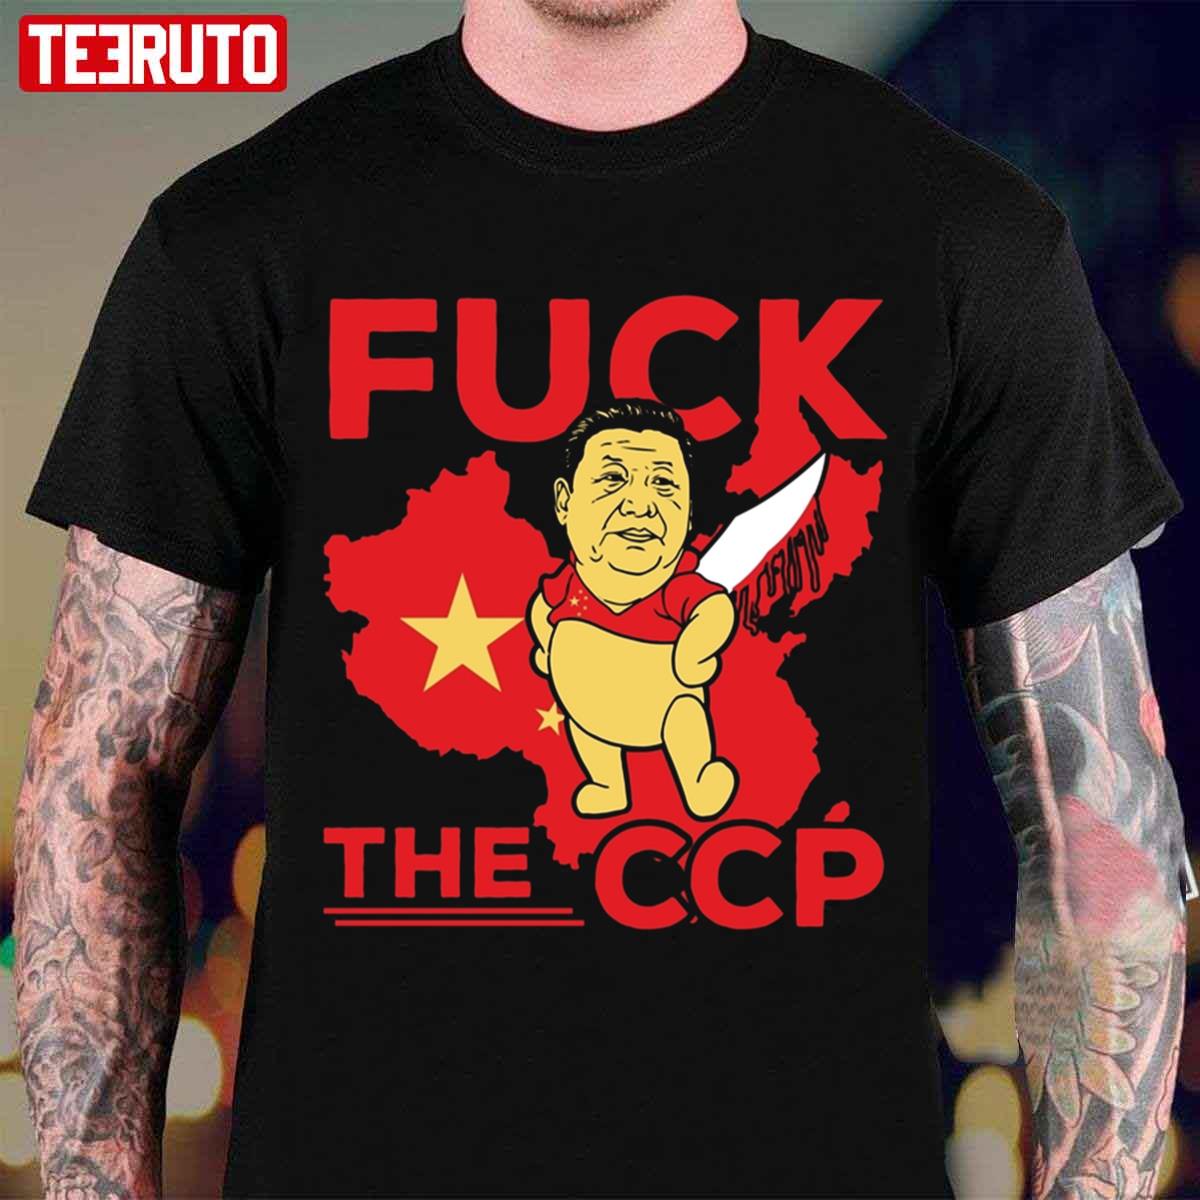 fuck-ccp-xi-jinping-fuck-chinese-communist-party-graphic-unisex-tshirtsnymx.jpg